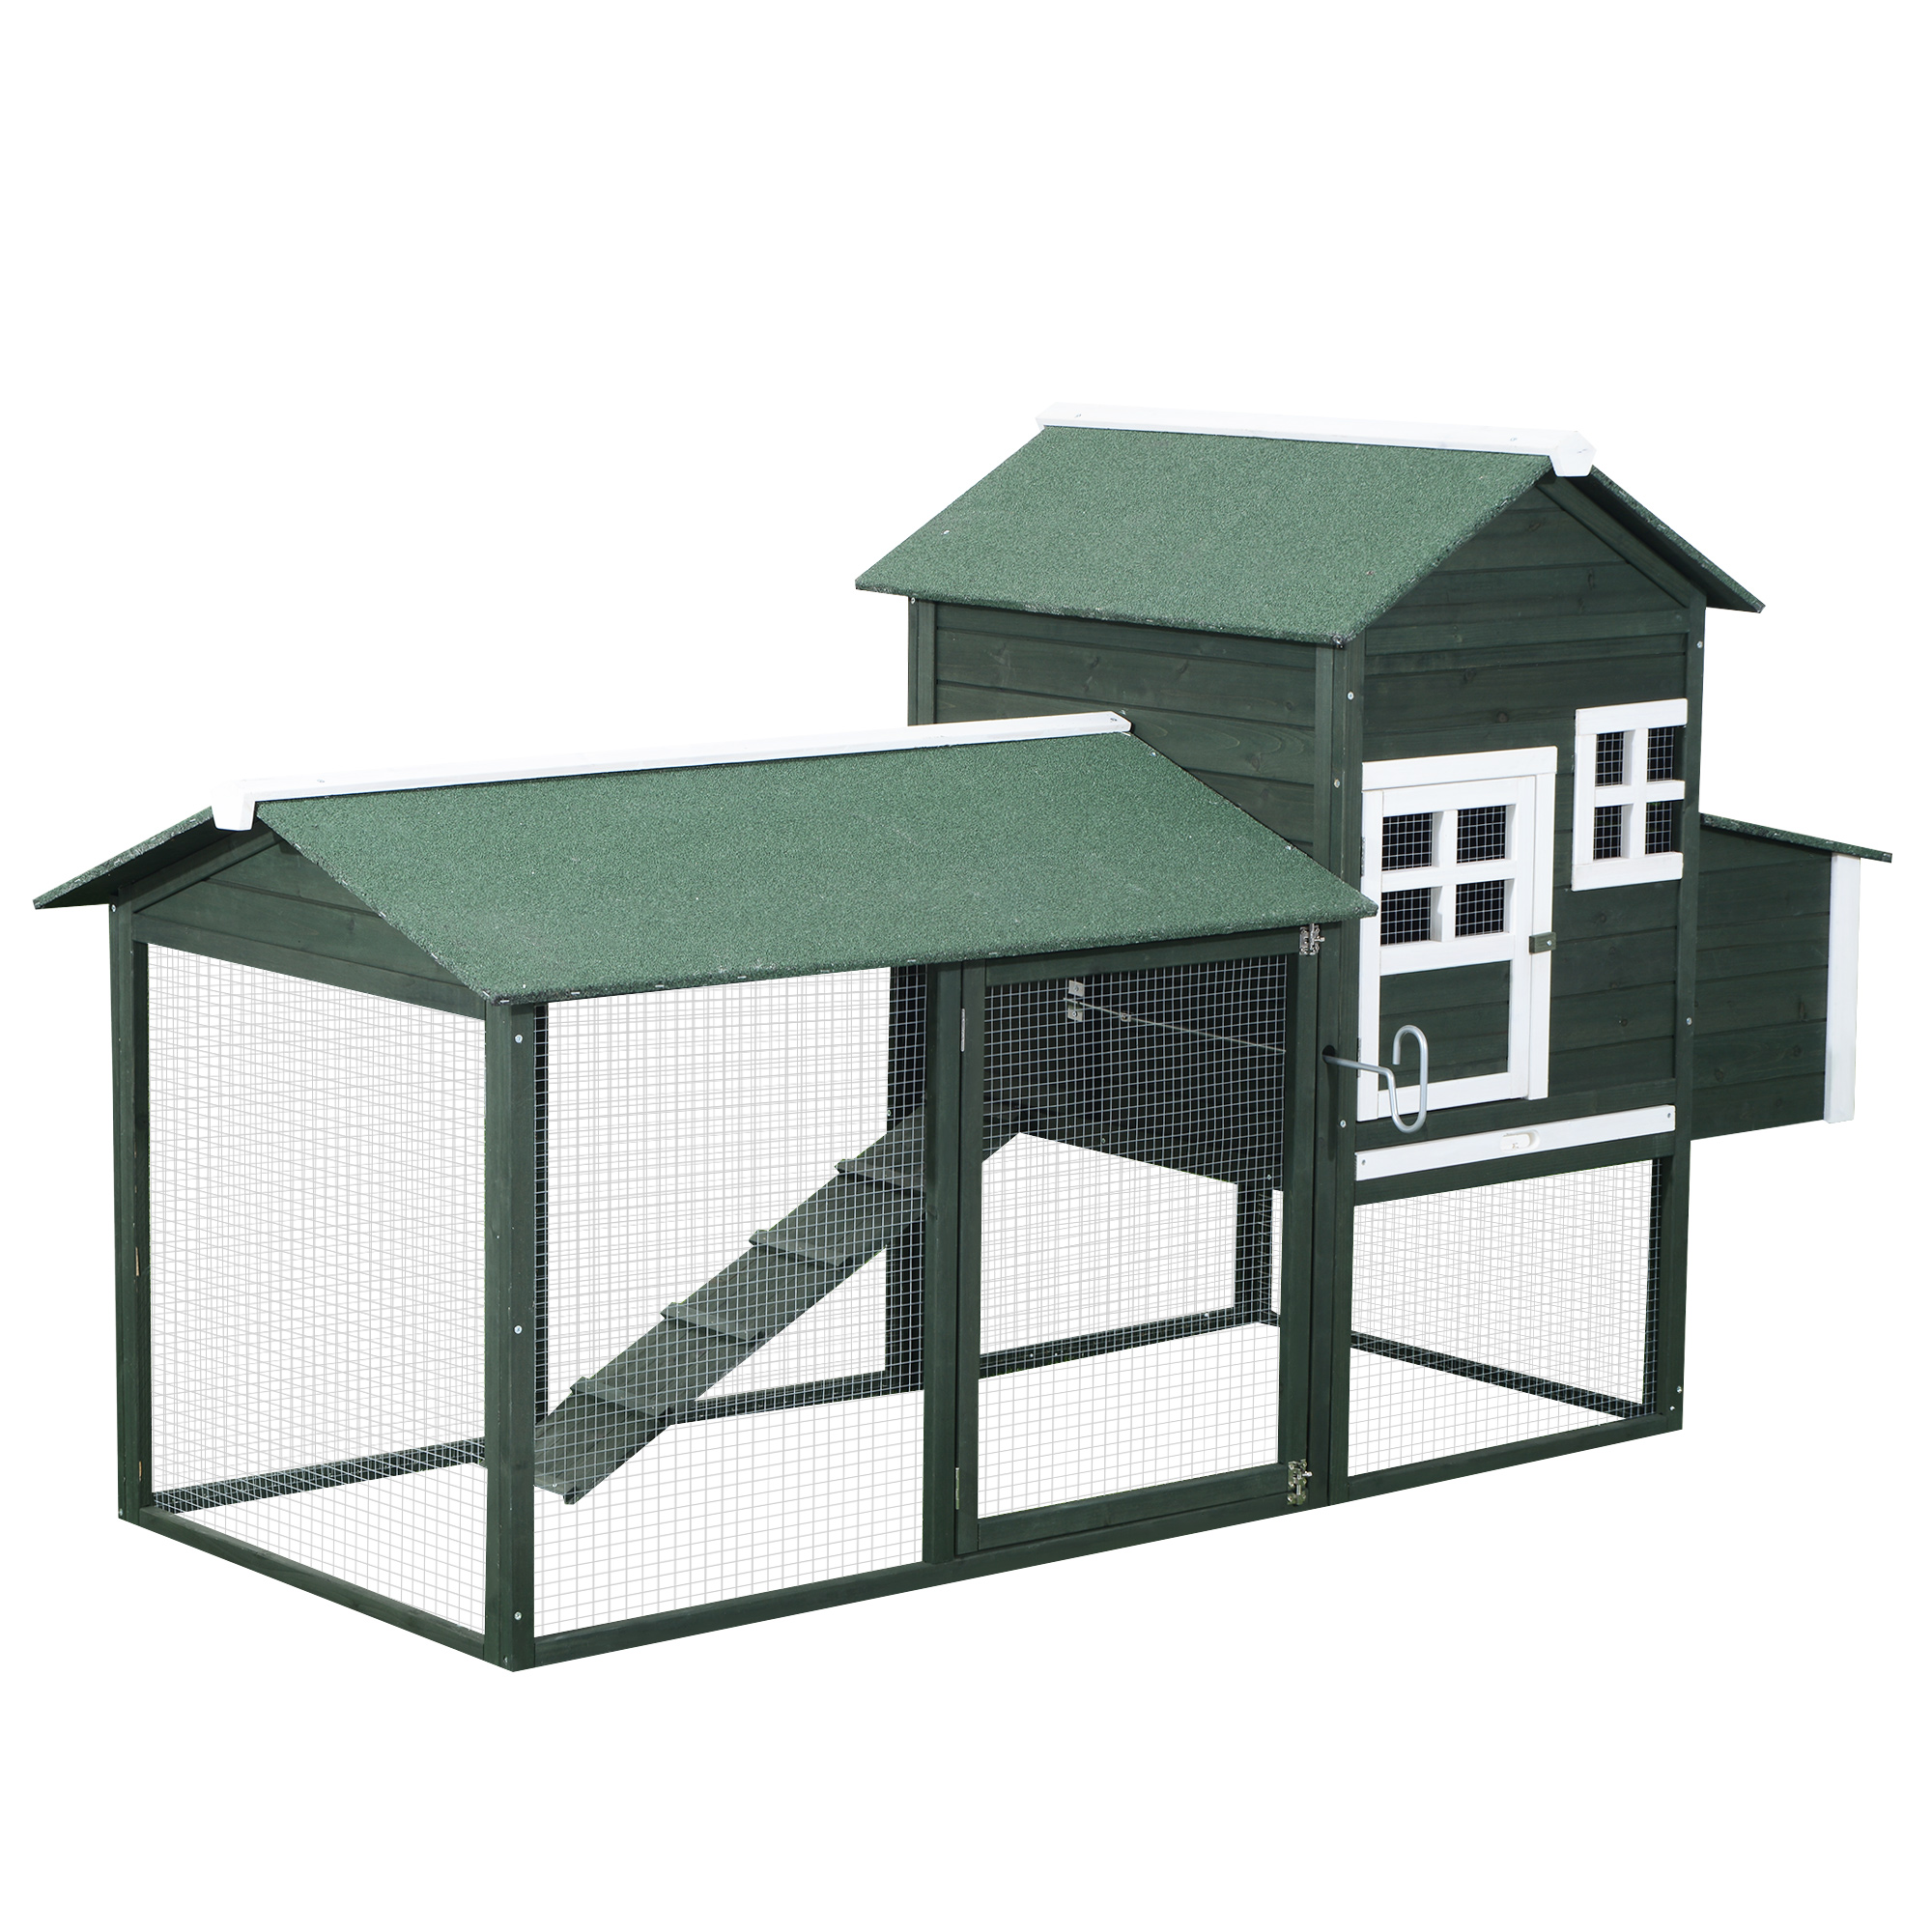 84" Chicken Coop Wooden Hen House Rabbit Hutch Poultry Cage